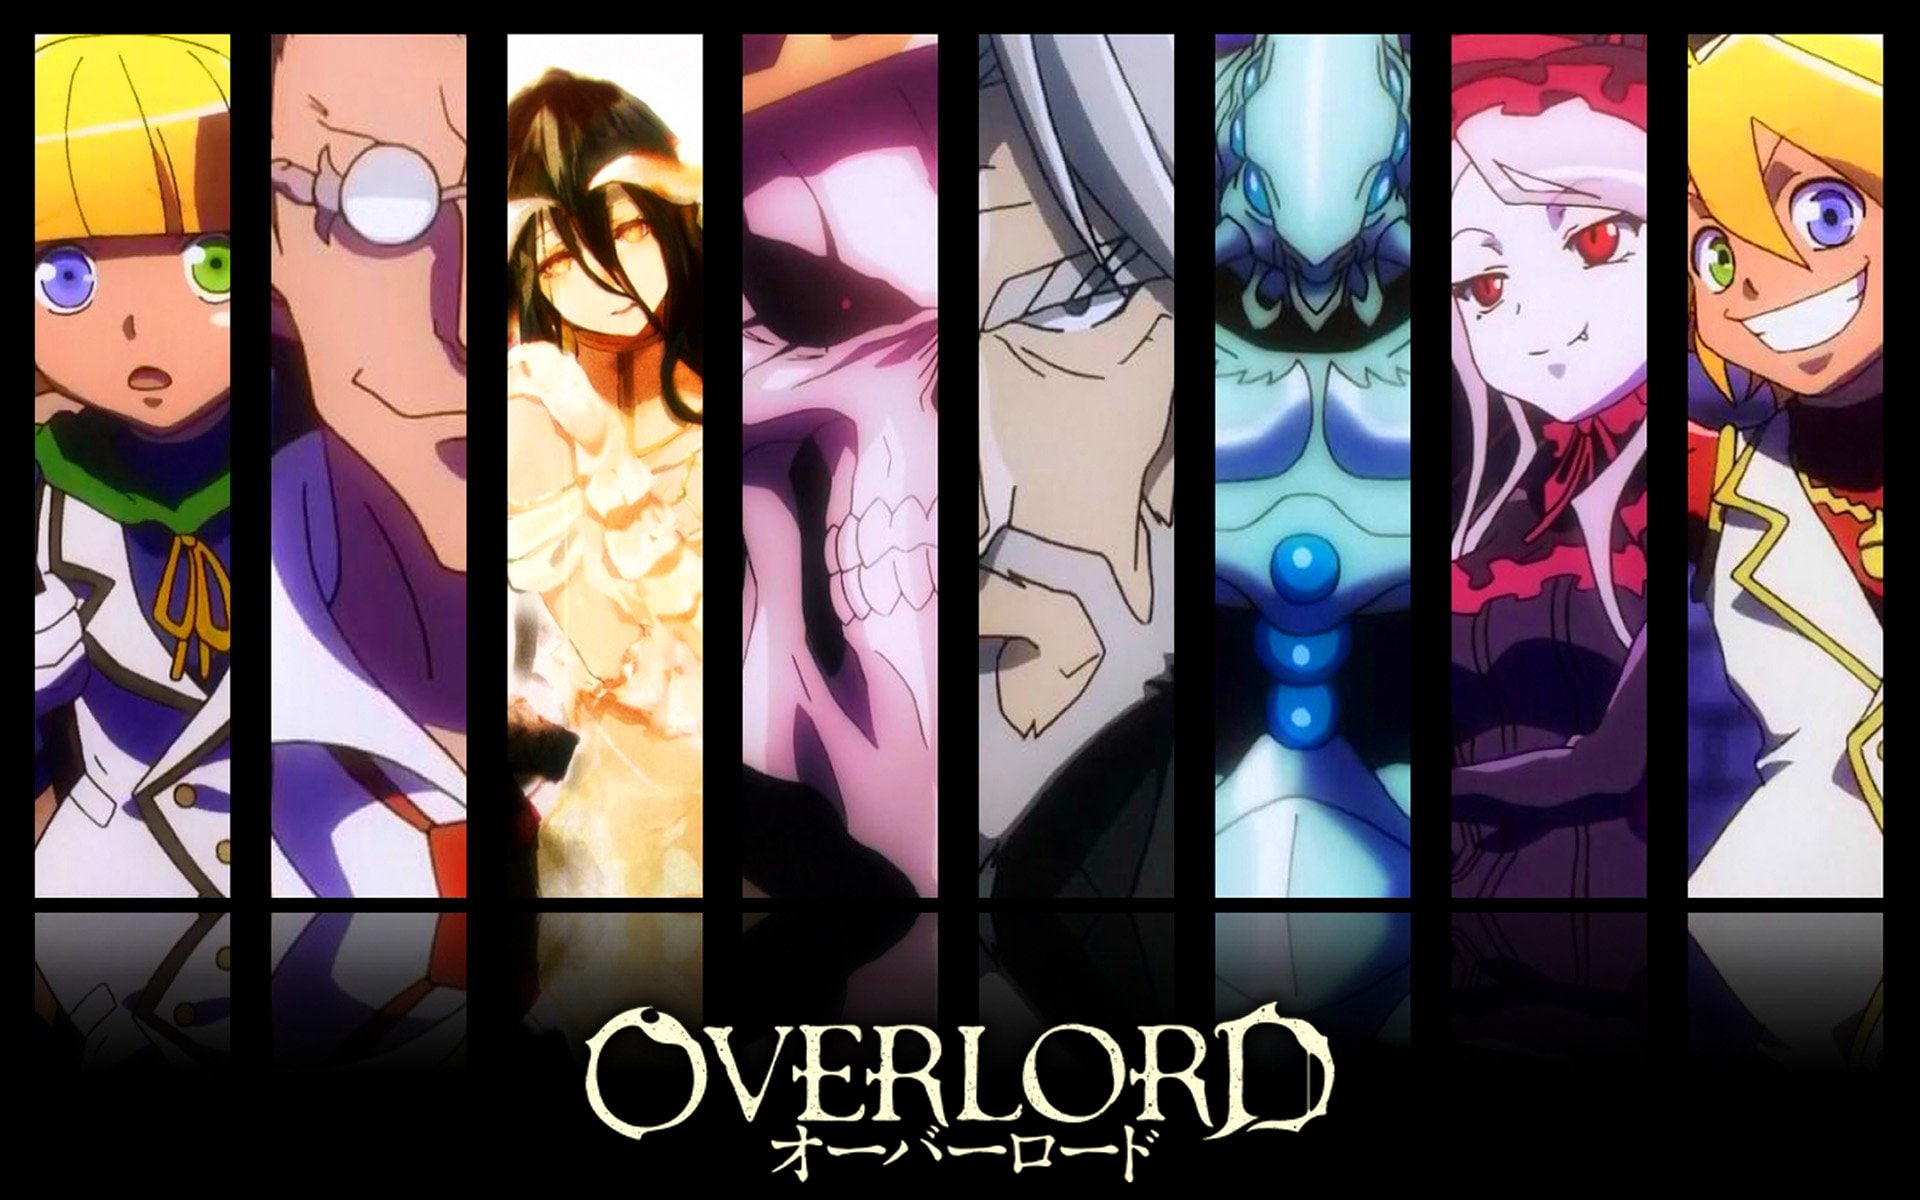 Overlord characters collage, Anime, Ainz Ooal Gown, Albedo (Overlord)